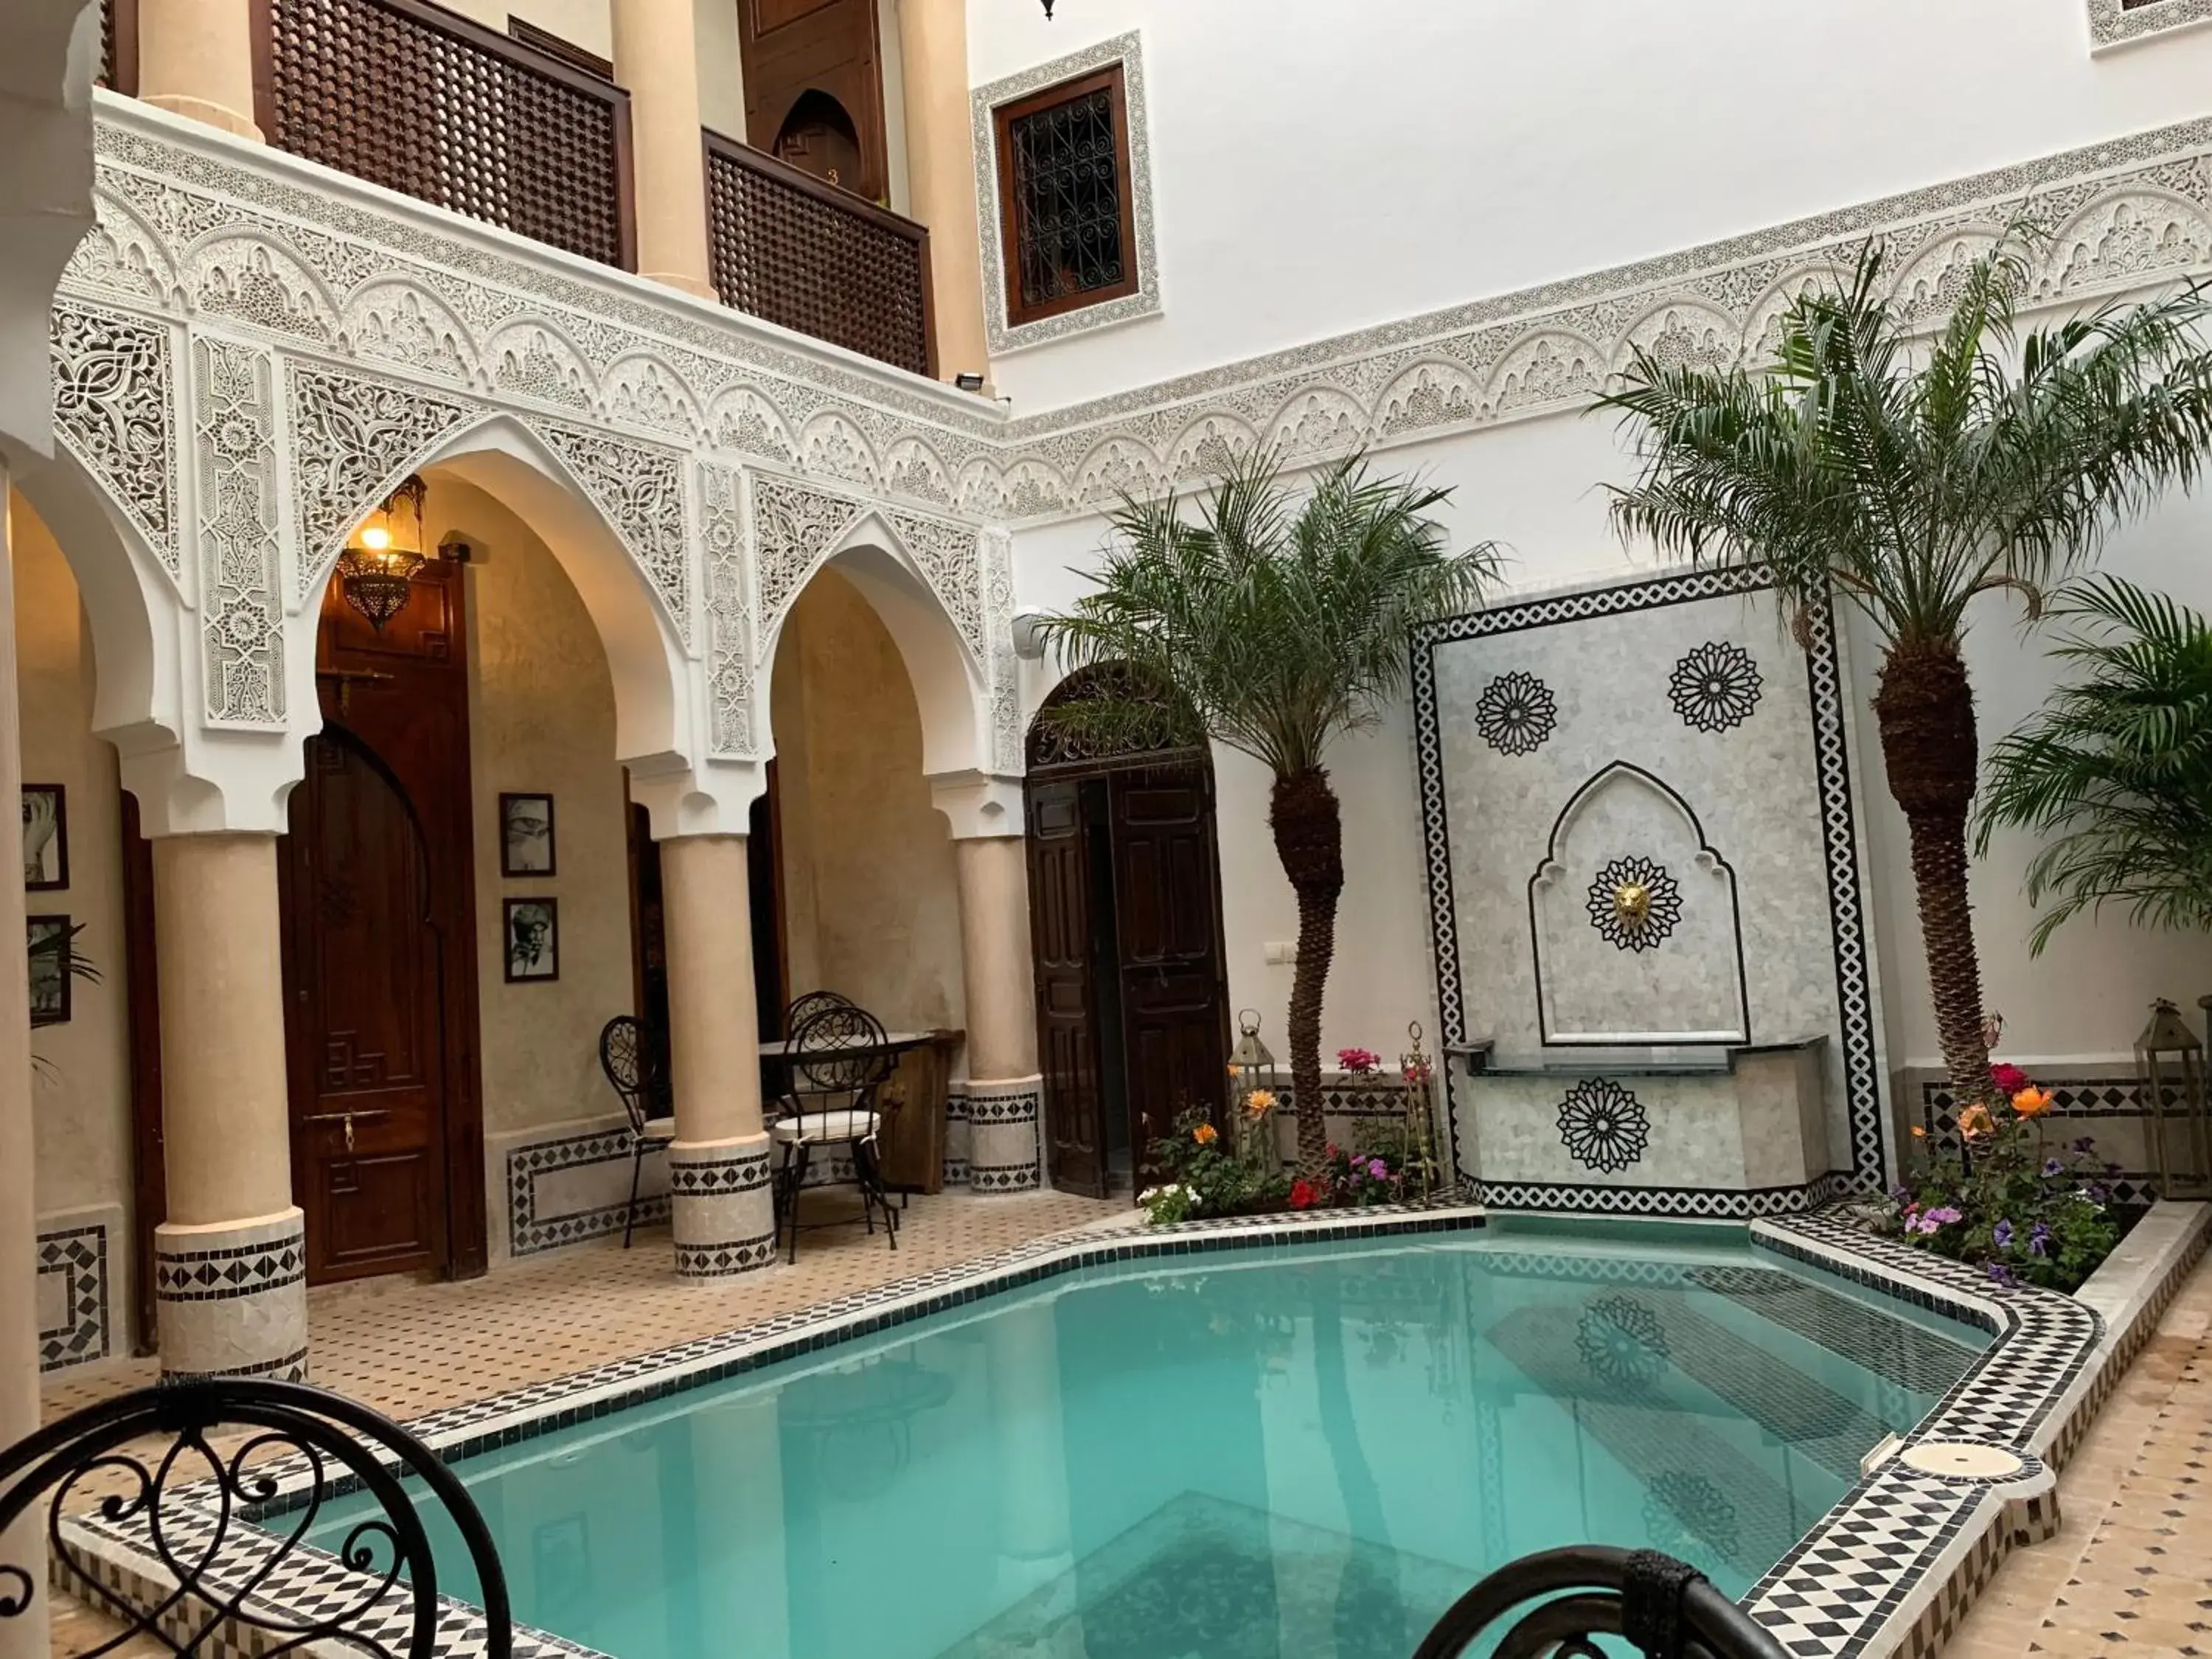 Property building, Swimming Pool in Riad Abaka hotel & boutique